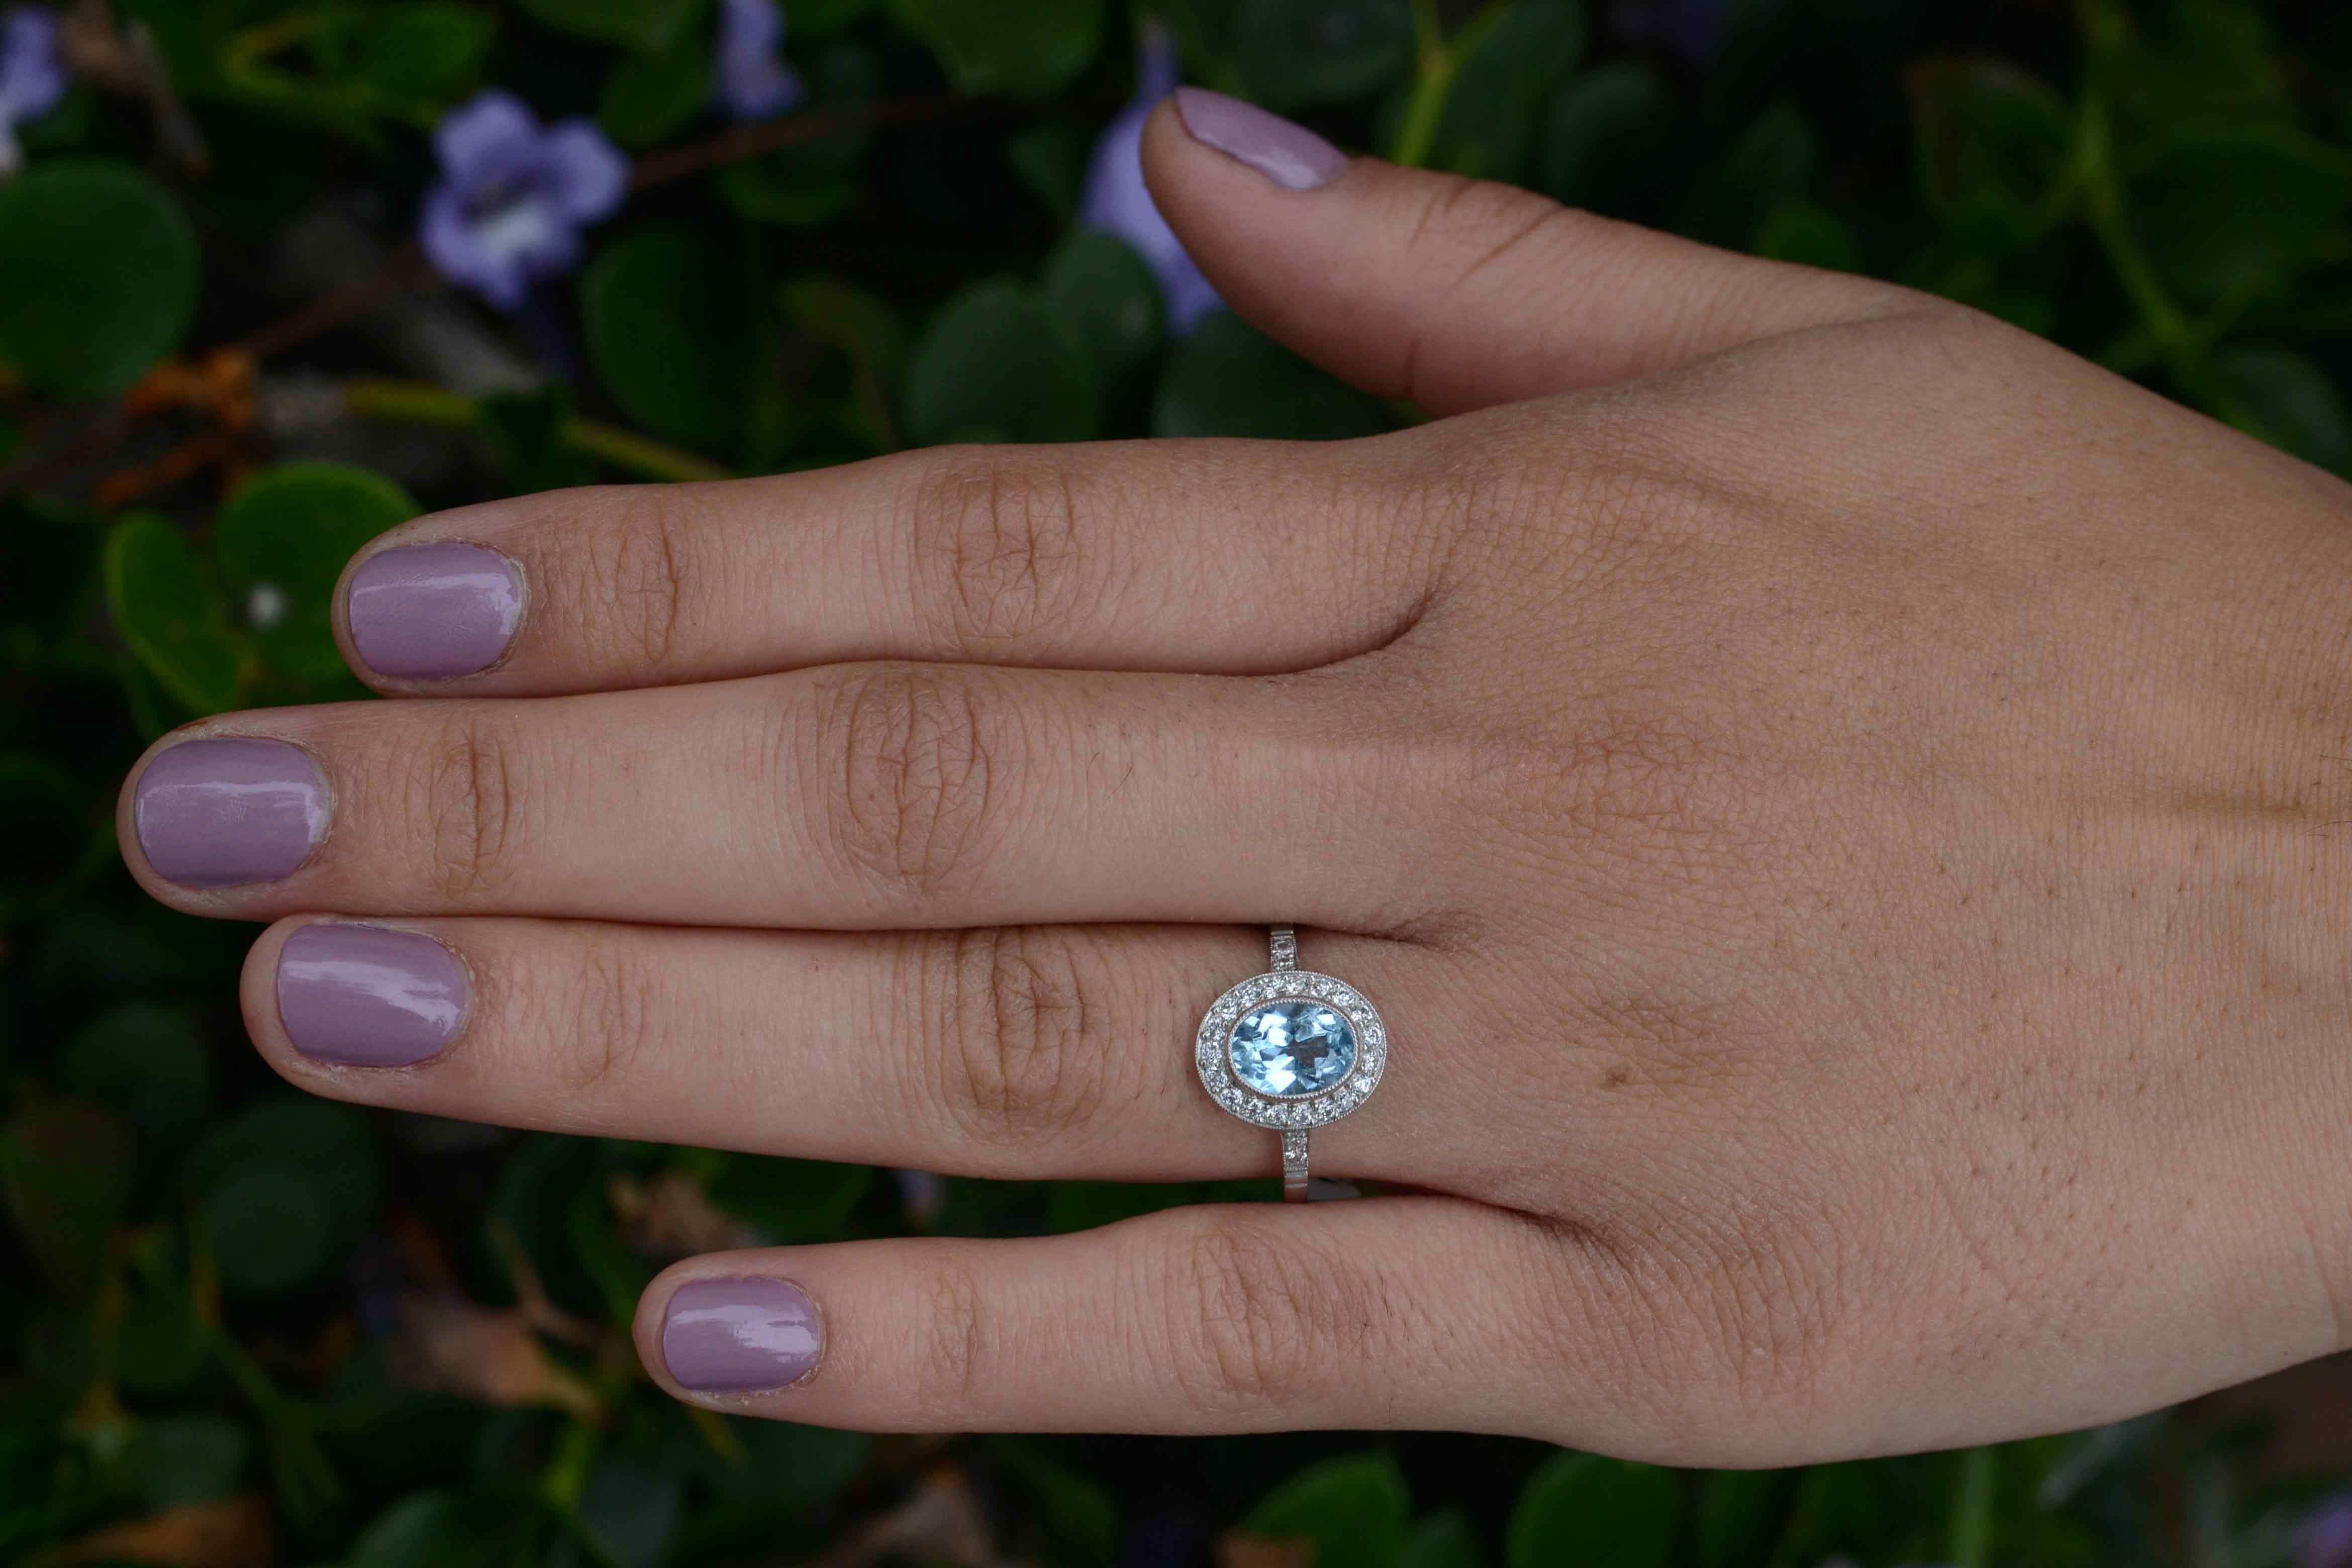 The Avondale vintage blue topaz engagement ring. Floating in a pool of diamonds is a vivid, aqua-blue topaz in a dainty milgrain bezel. We love the oval diamond halo exhibiting a strong Art Deco geometry (and how it makes the gemstone